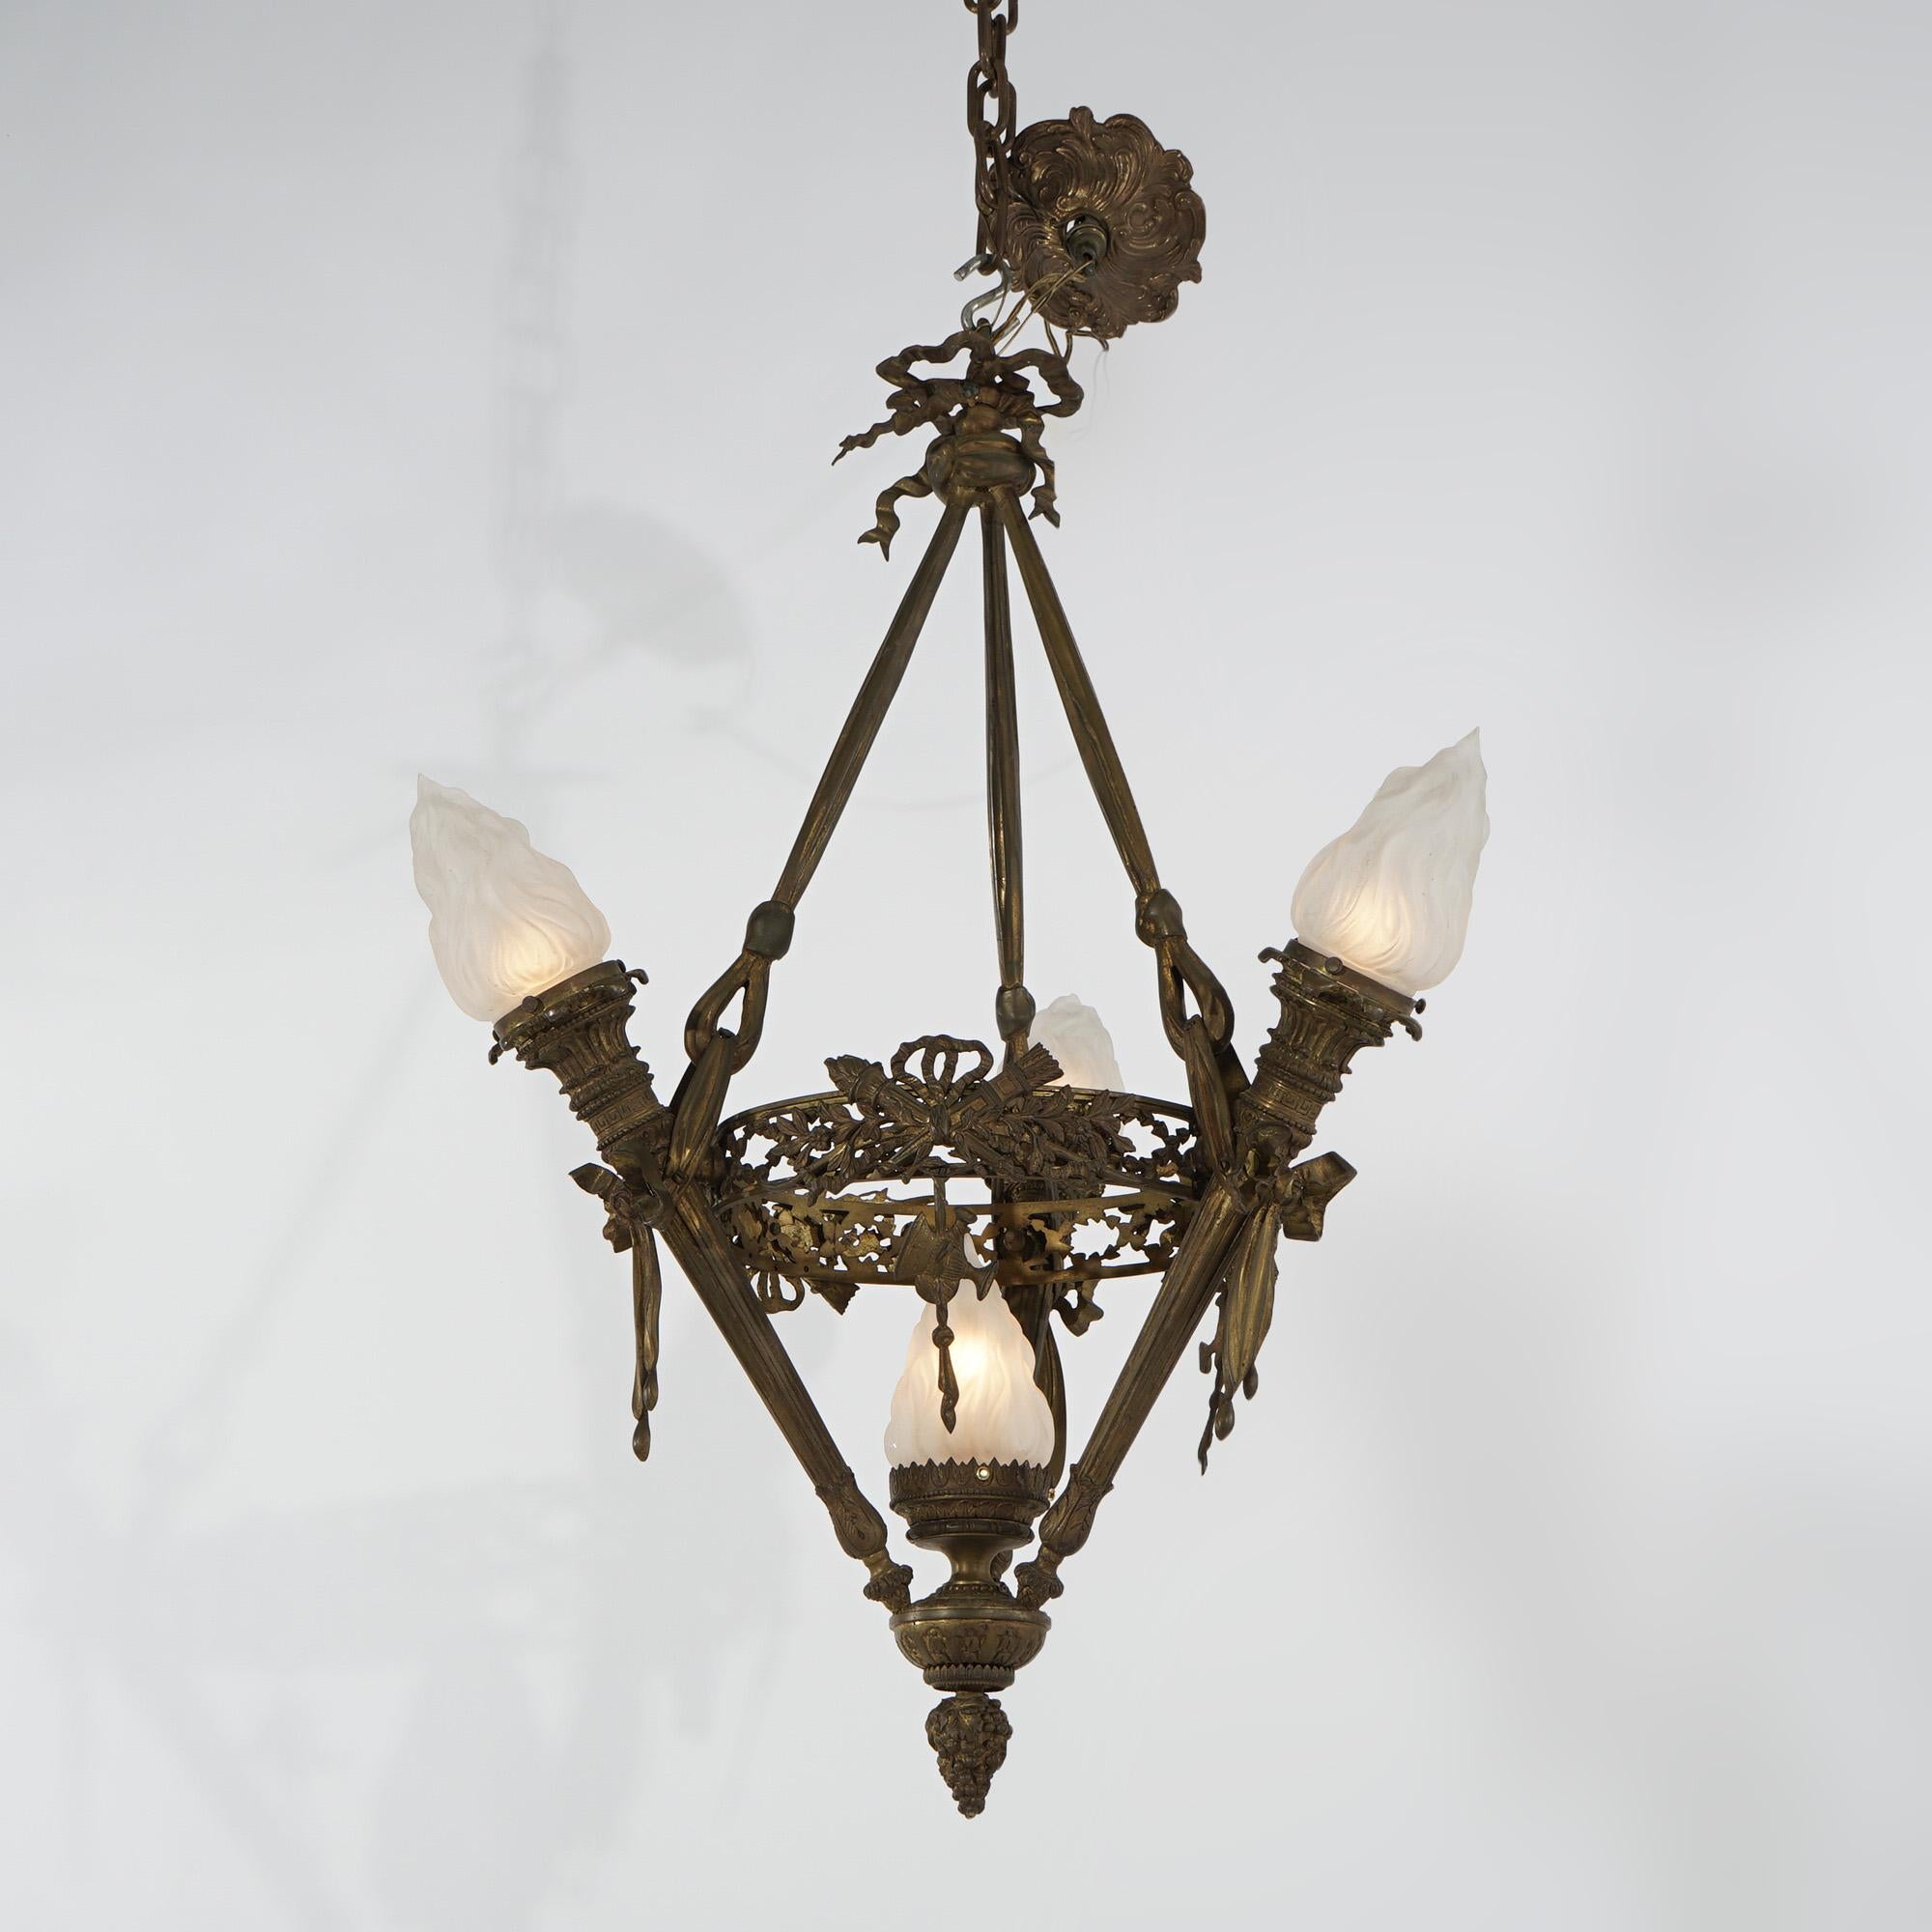 Antique Gilt Bronze French Empire Figural Four Light Torch Hanging Fixture C1920 For Sale 6